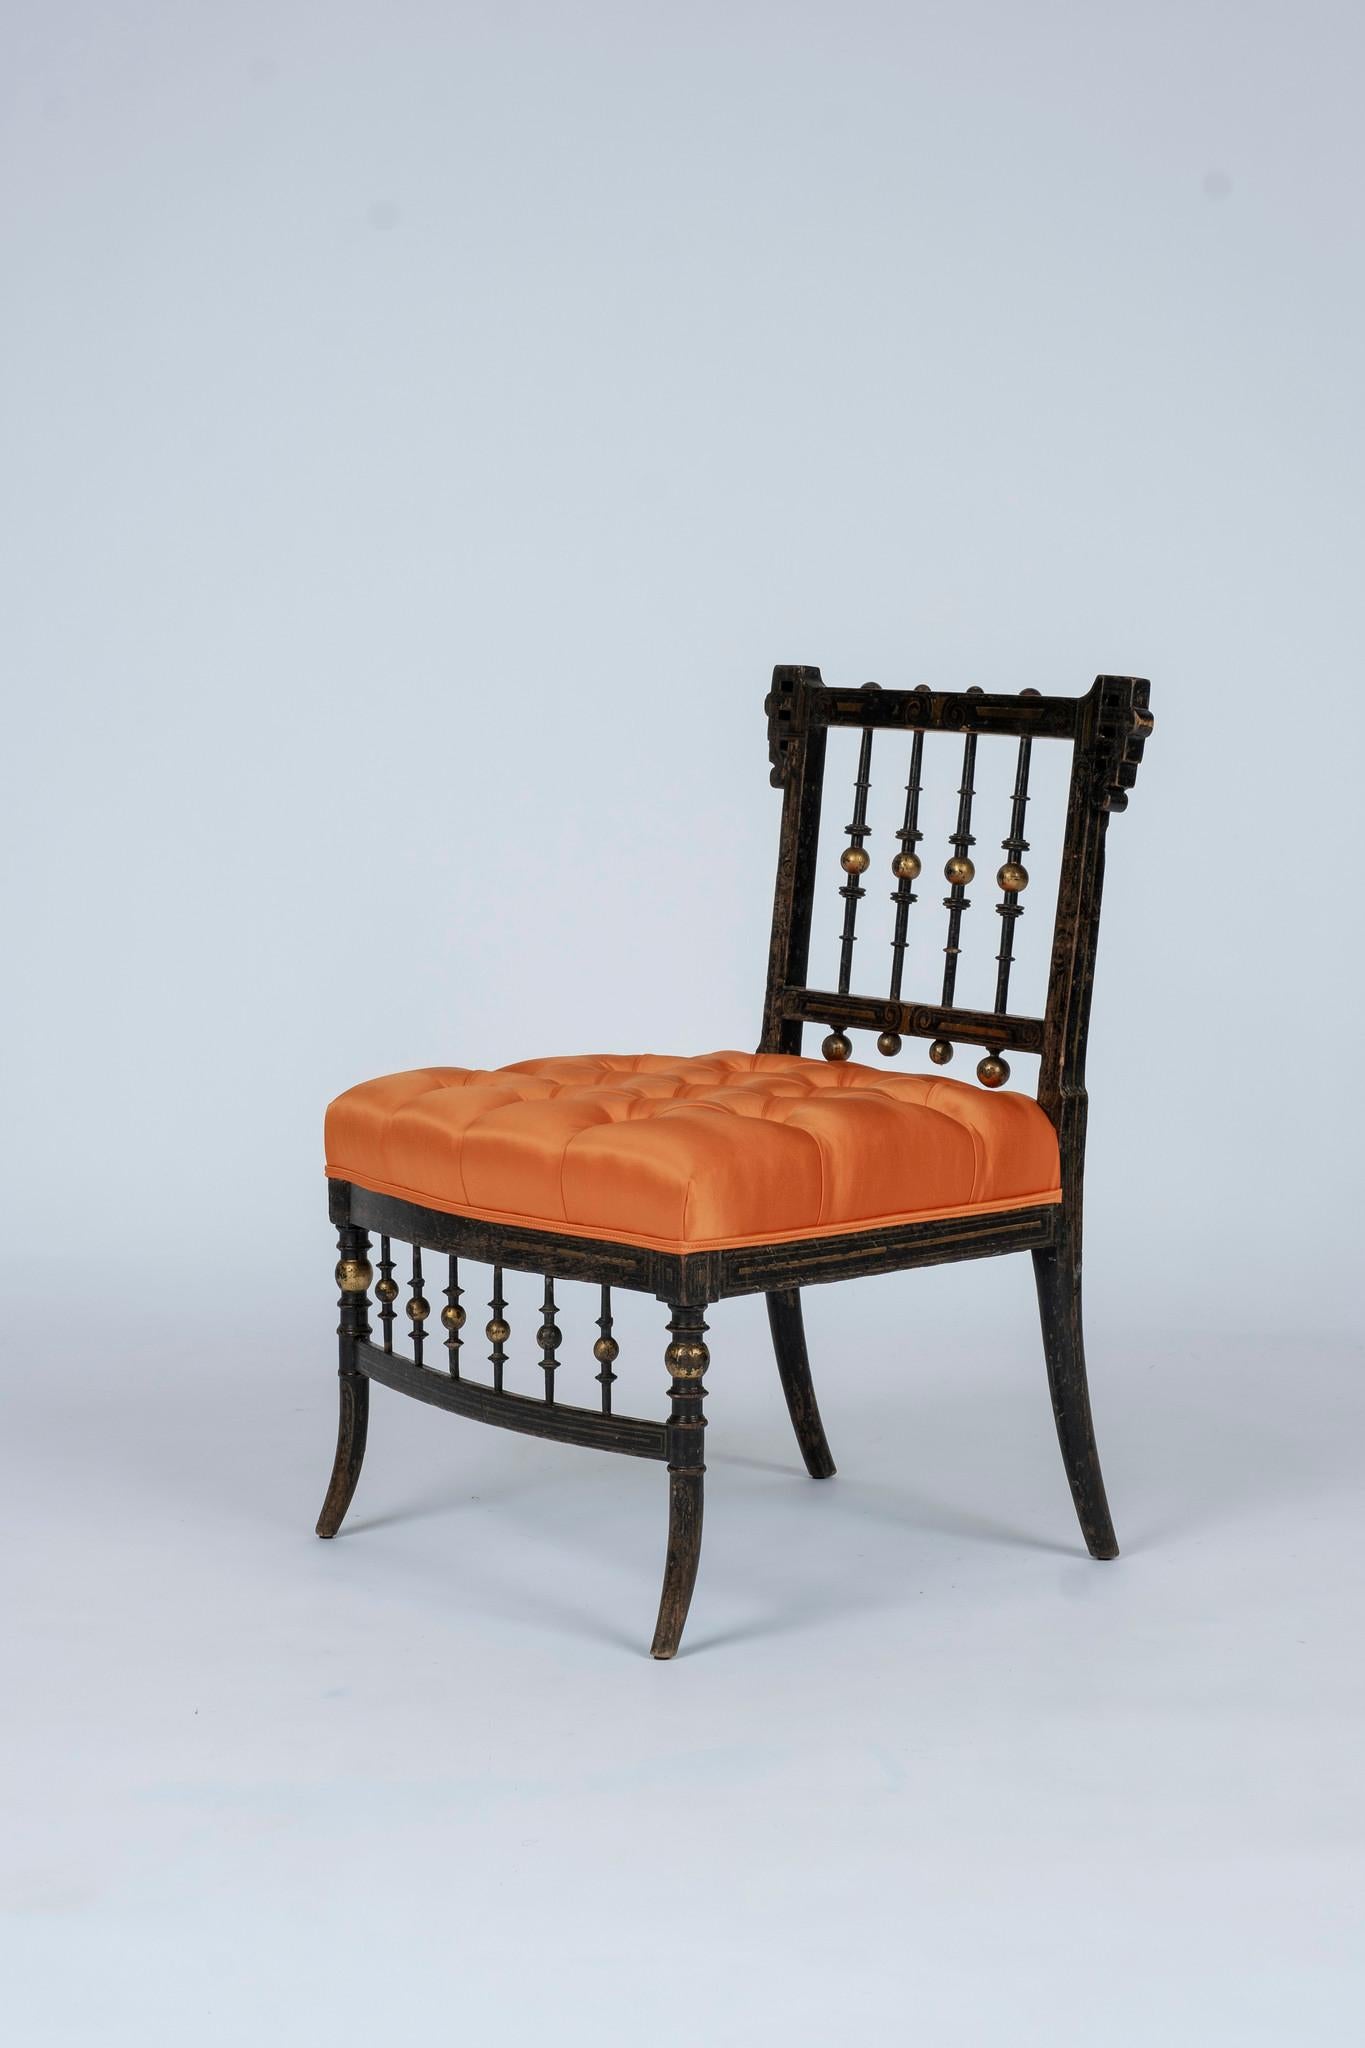 These low chairs were all of the rage in mid-19th century Paris. It's ebonized wood frame has been decorated with polychrome and parcel-gilt details and newly upholstered in a luxurious satin silk with button tufted detailing. A perfect chair to